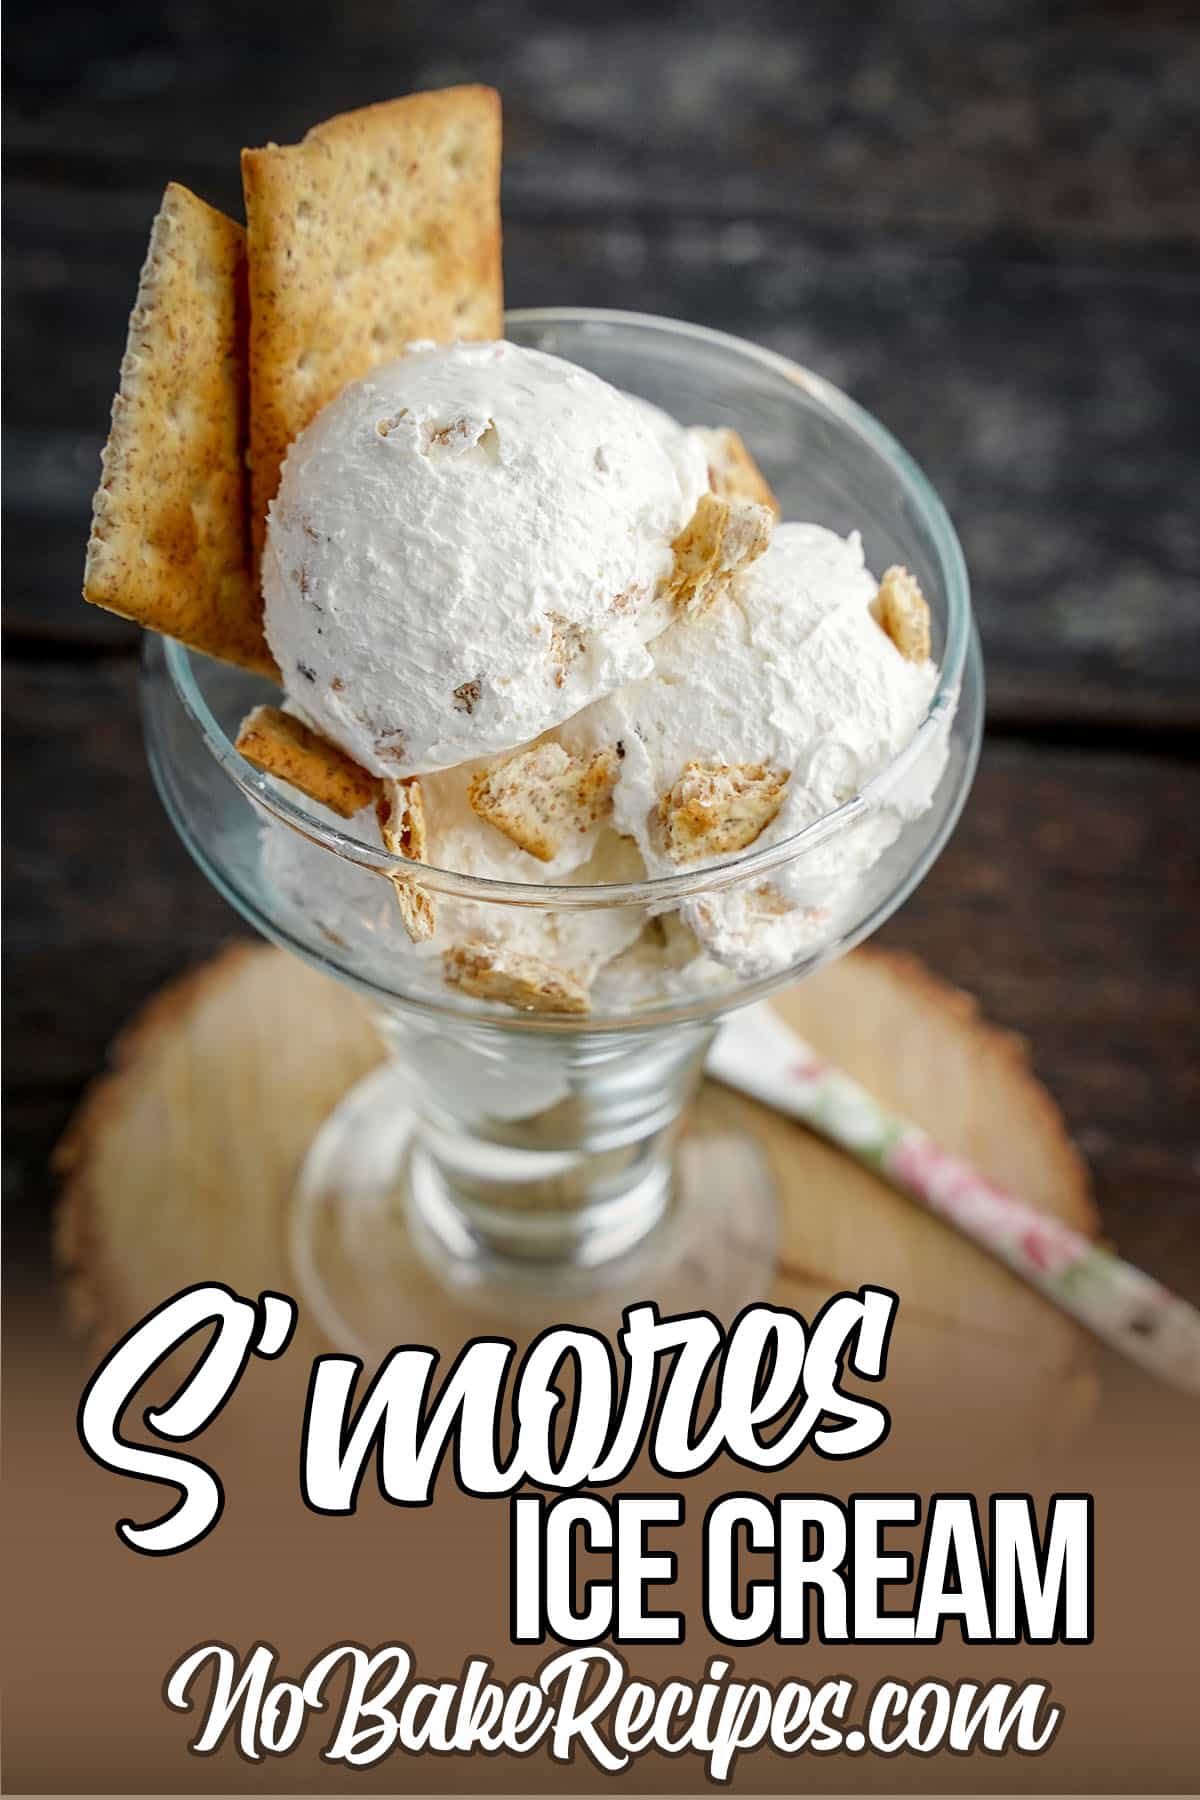 s'mores flavored ice cream with text which reads s'mores ice cream